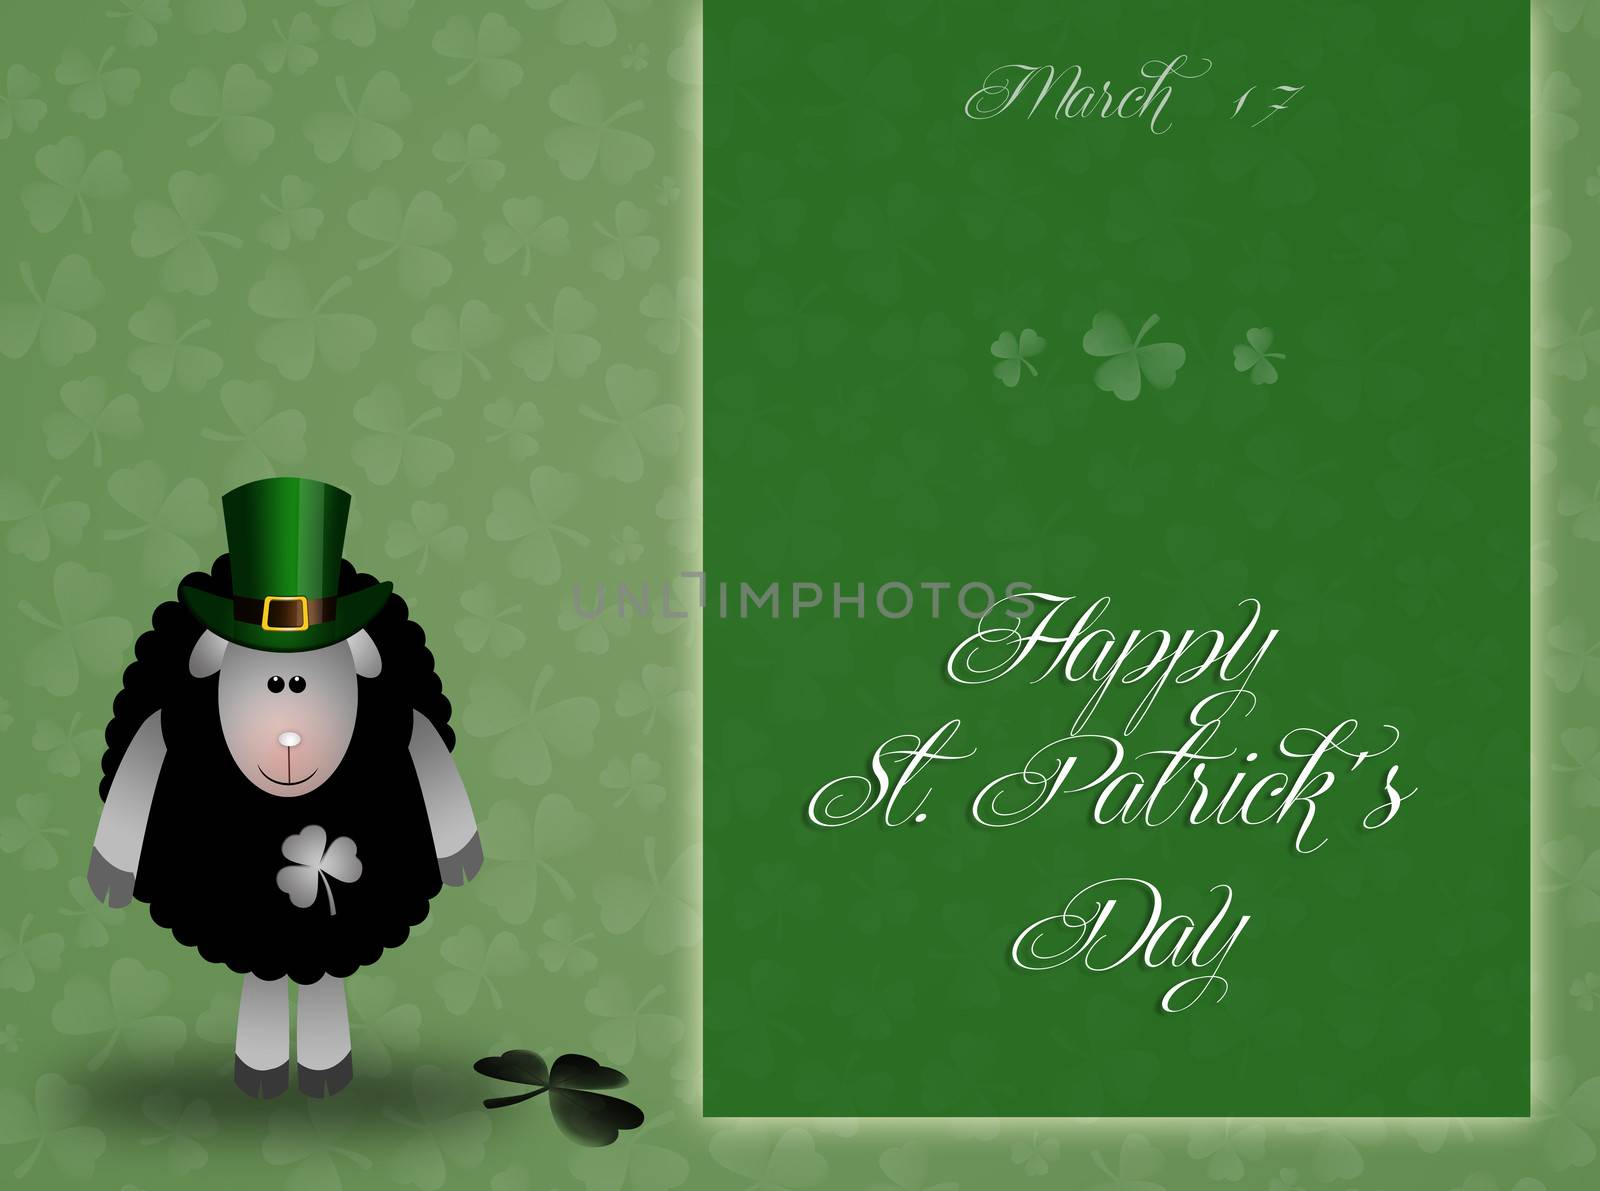 sheep for St. Patrick's Day